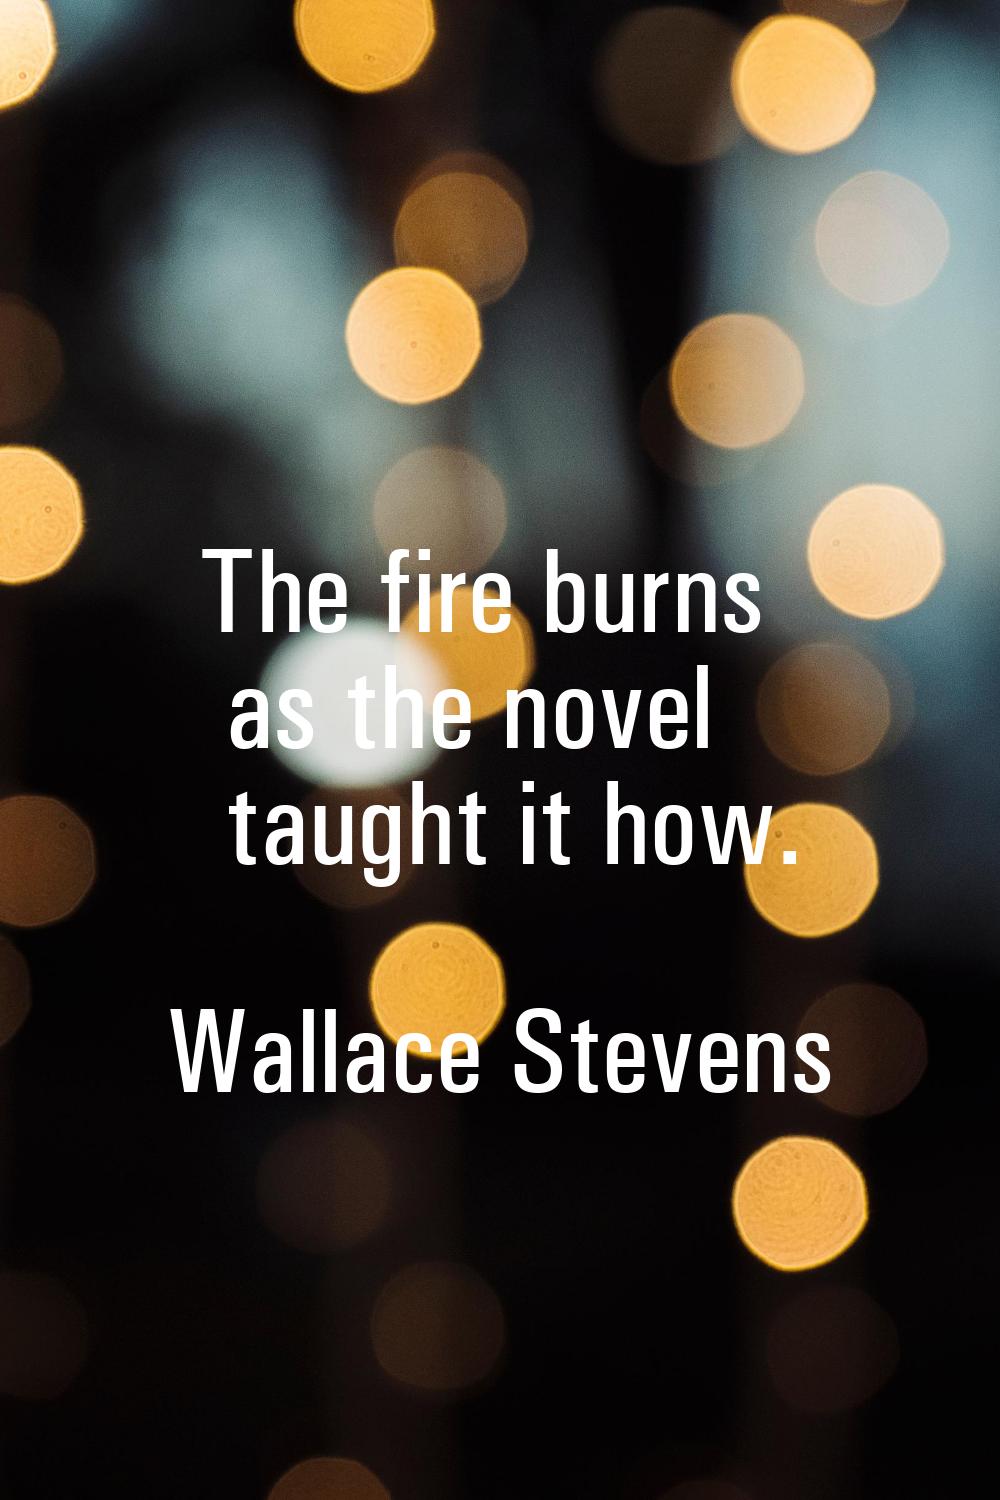 The fire burns as the novel taught it how.